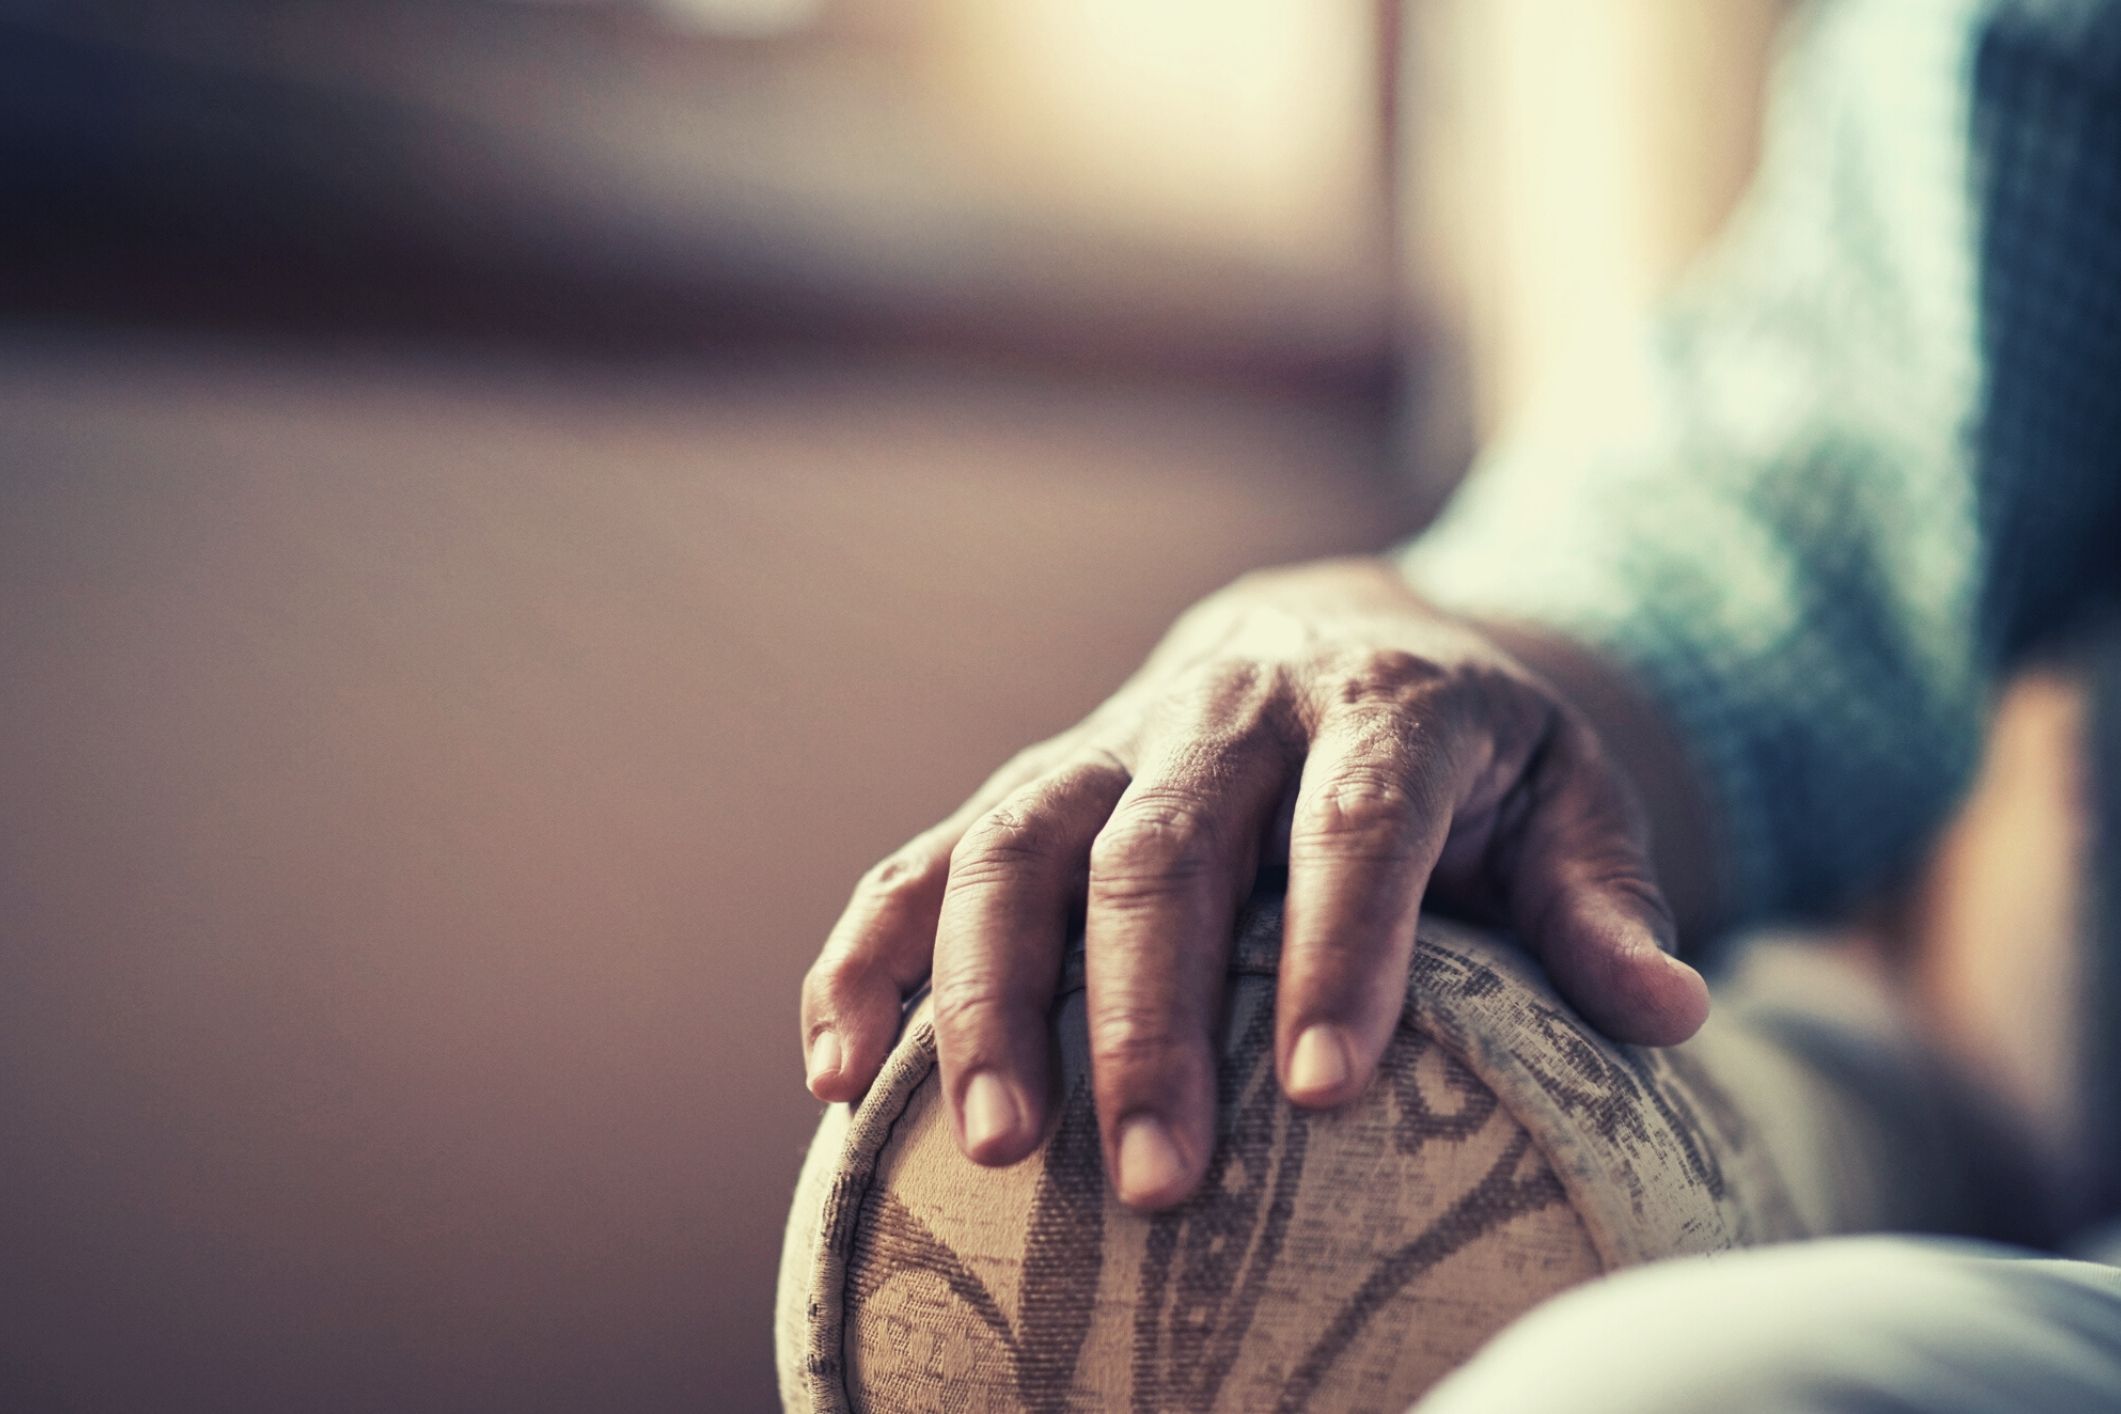 Elderly person's hand aged care home